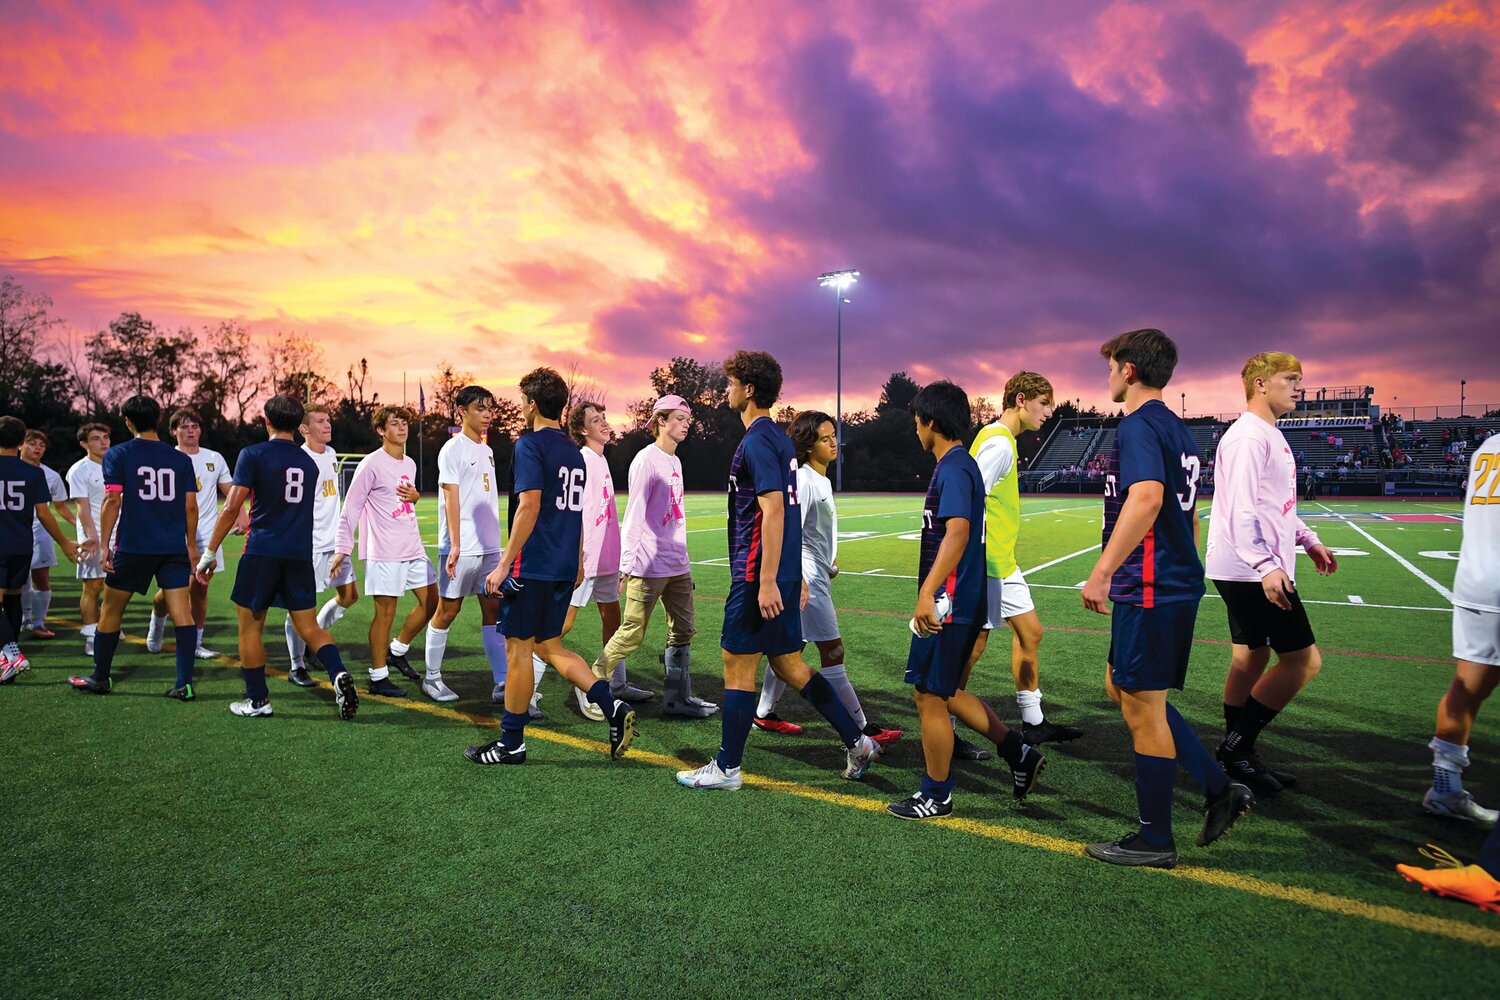 Players from the East and West boys soccer teams shake hands after East’s 2-0 victory over West.